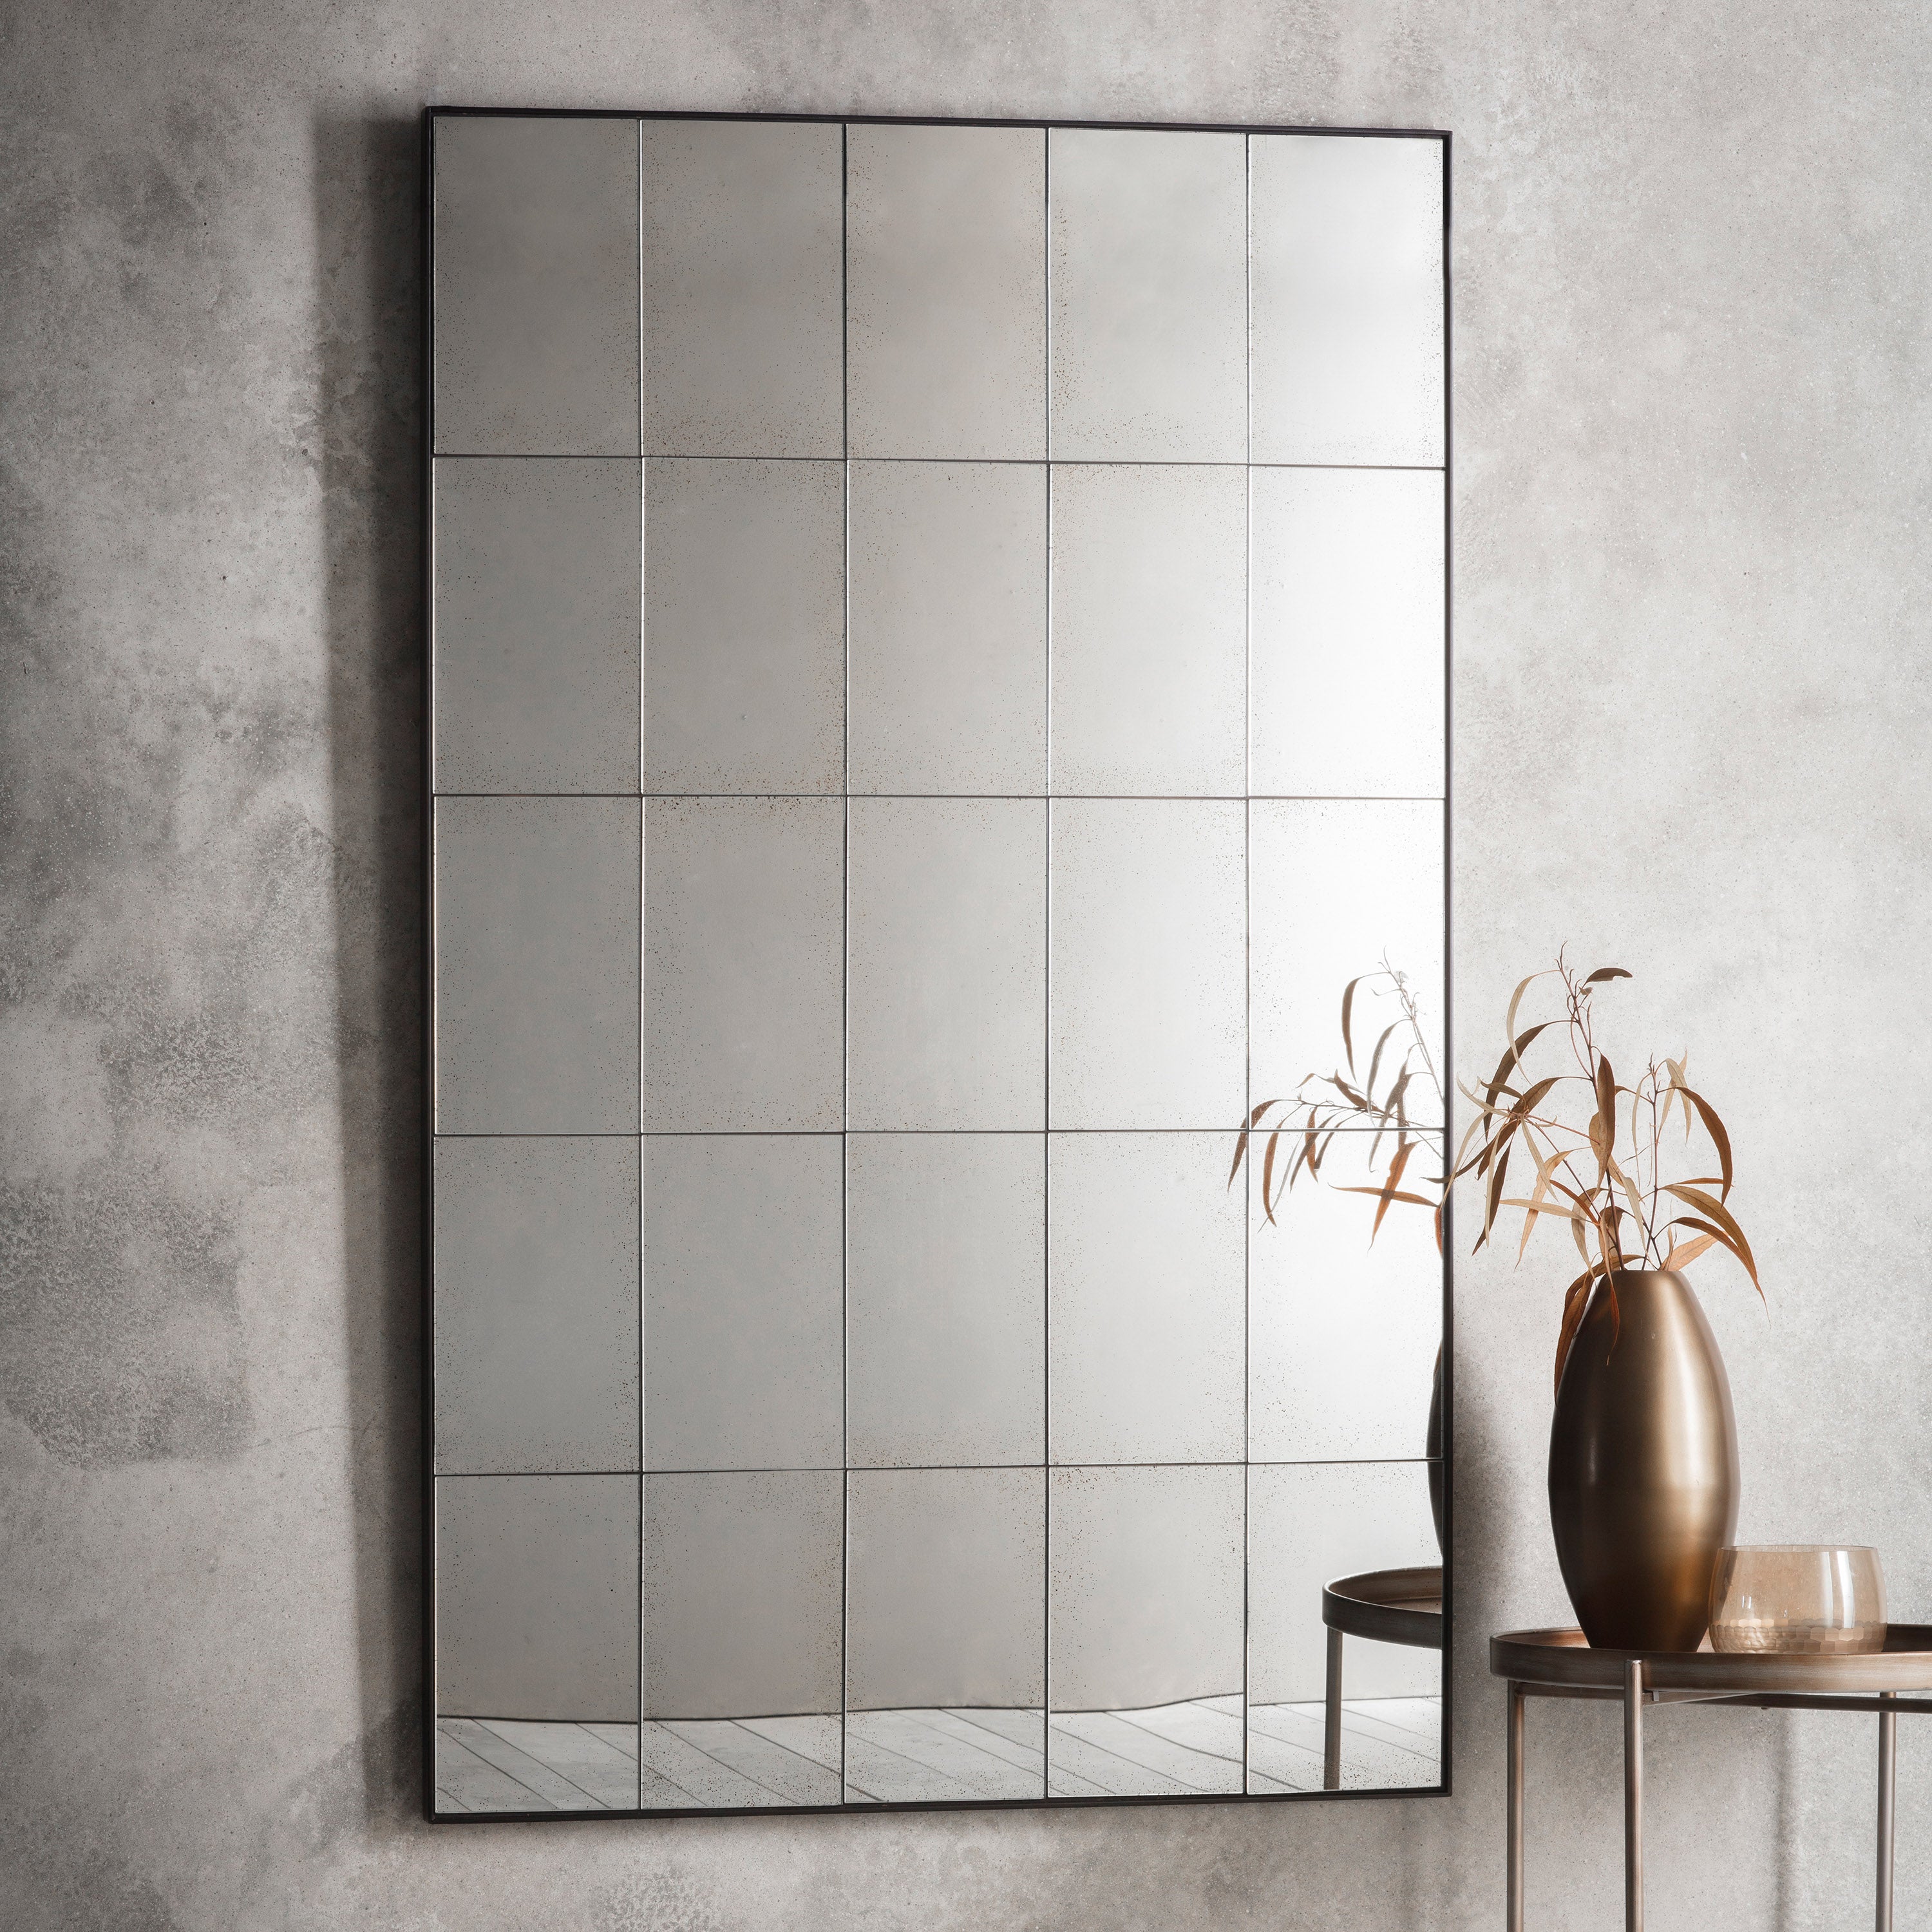 Toulouse Antique Finish Mirror